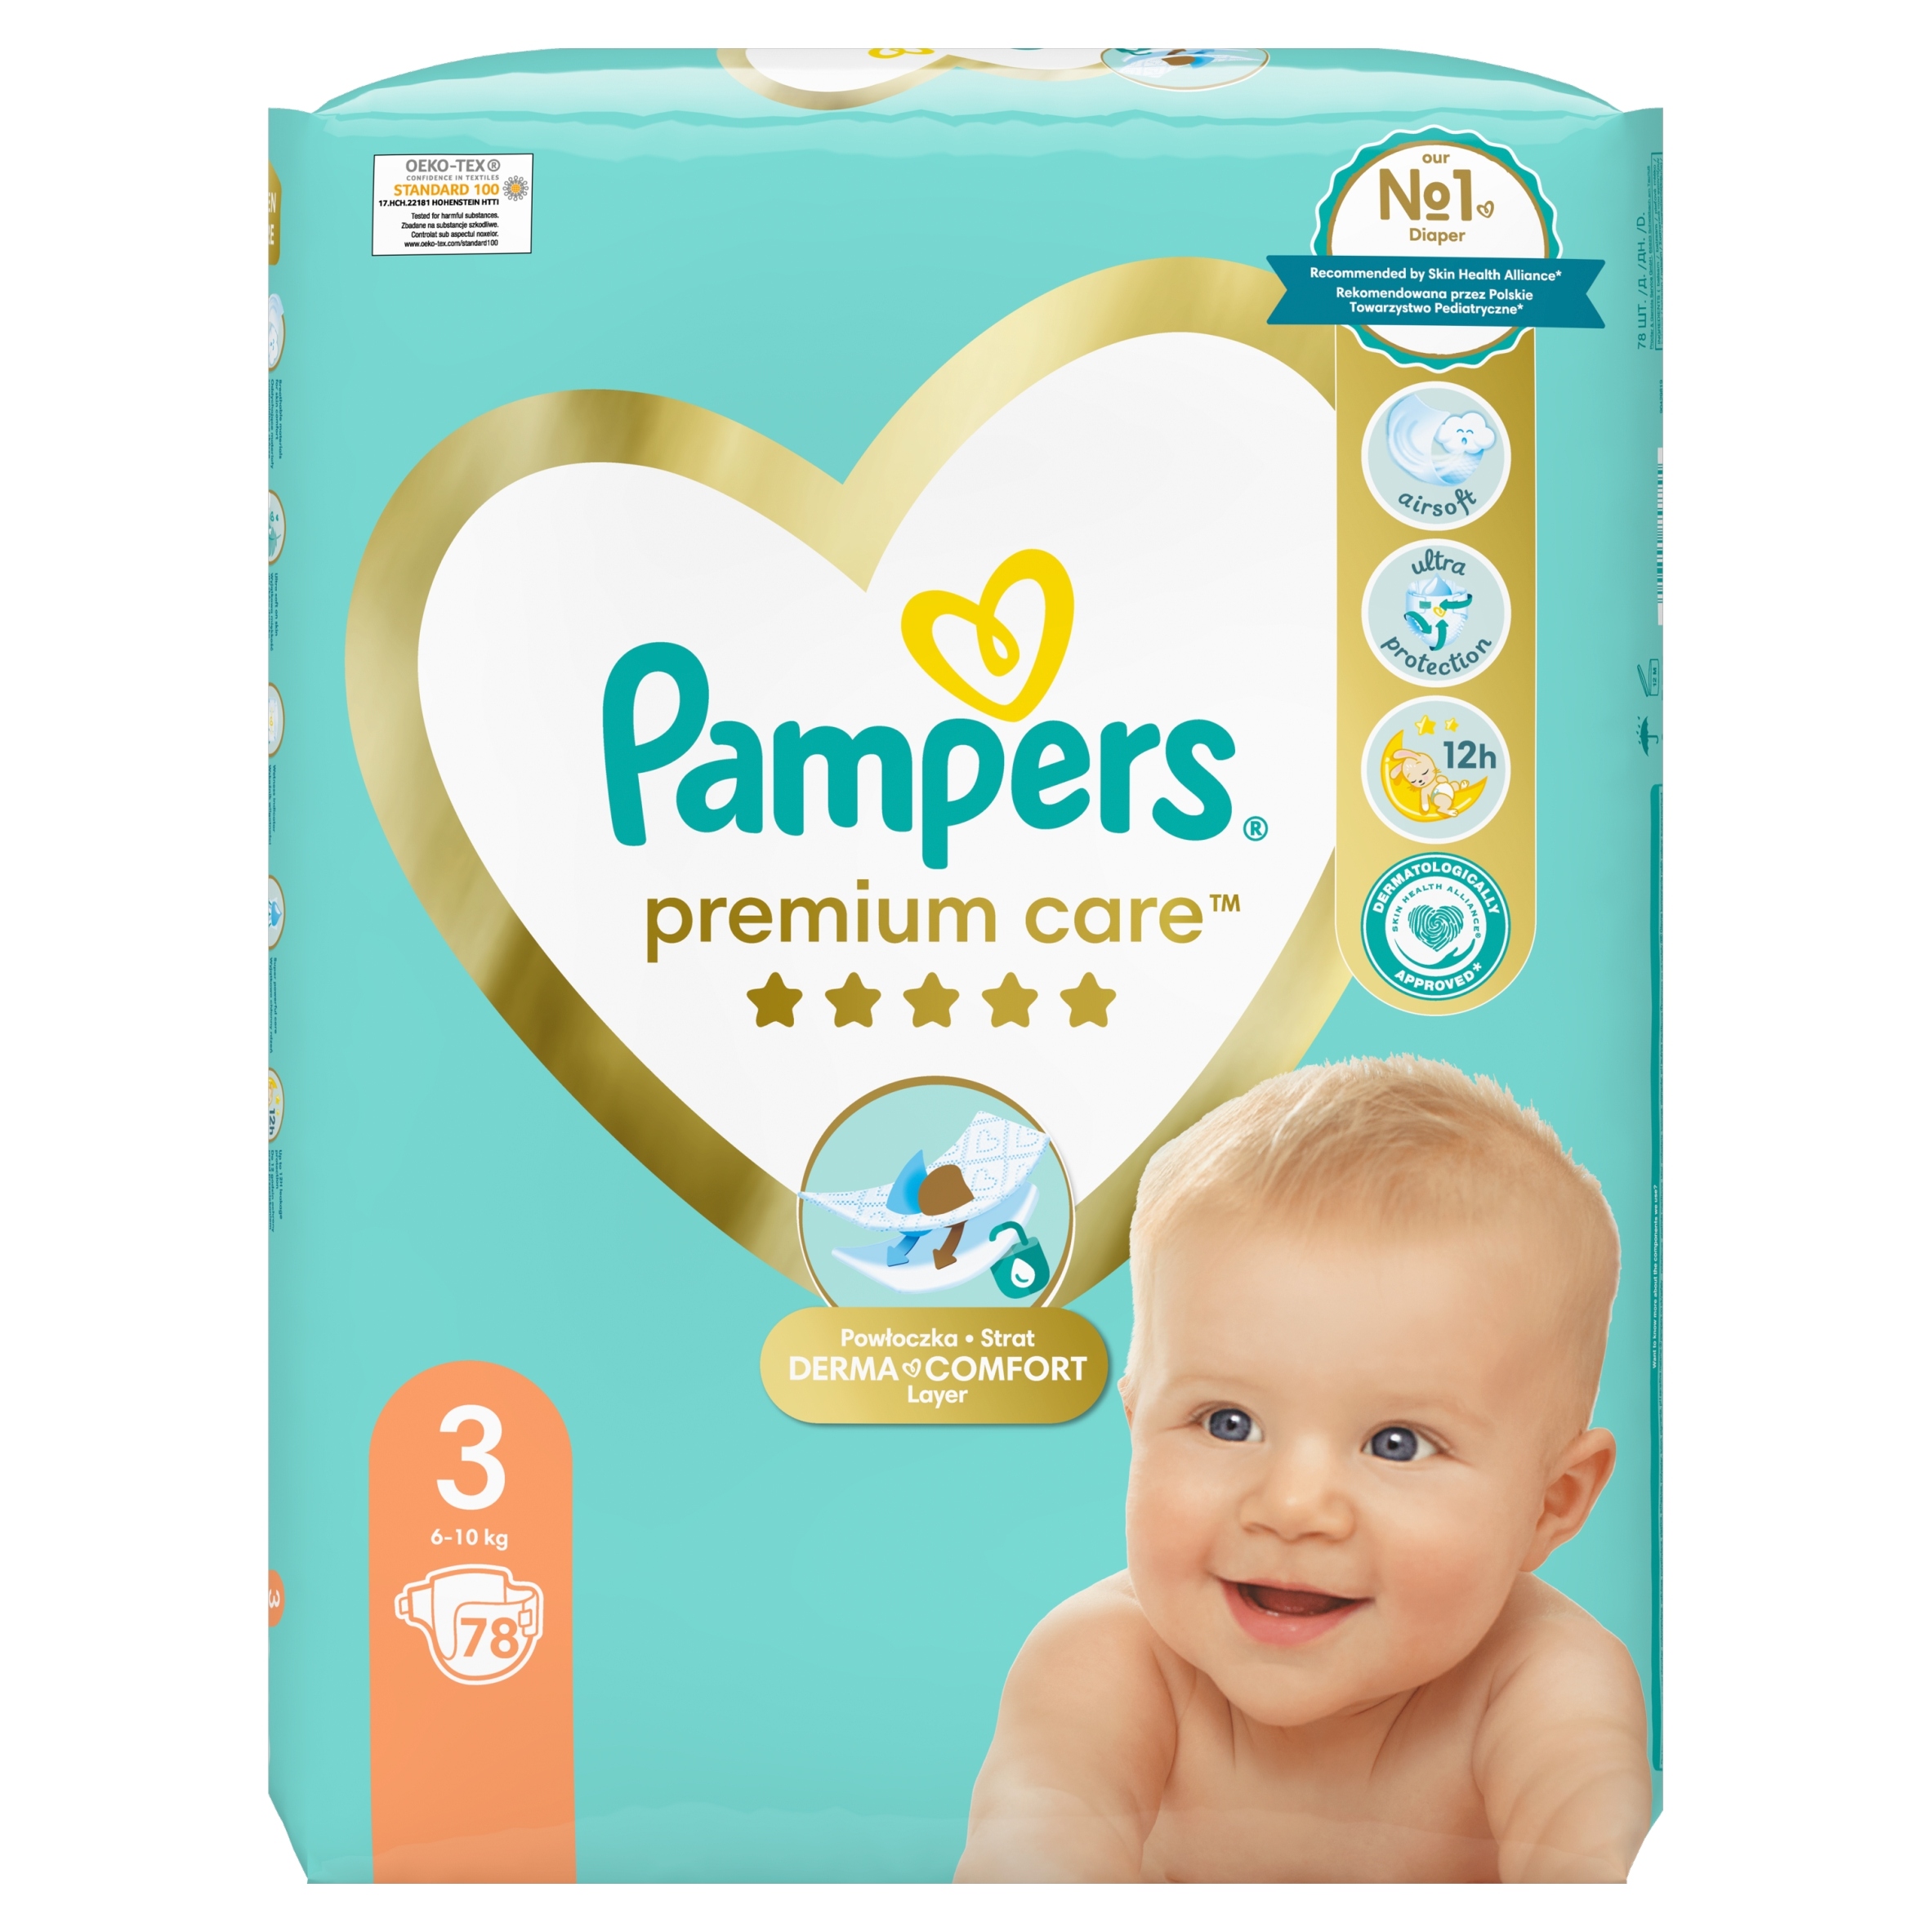 chust pampers new baby sens 54 szt